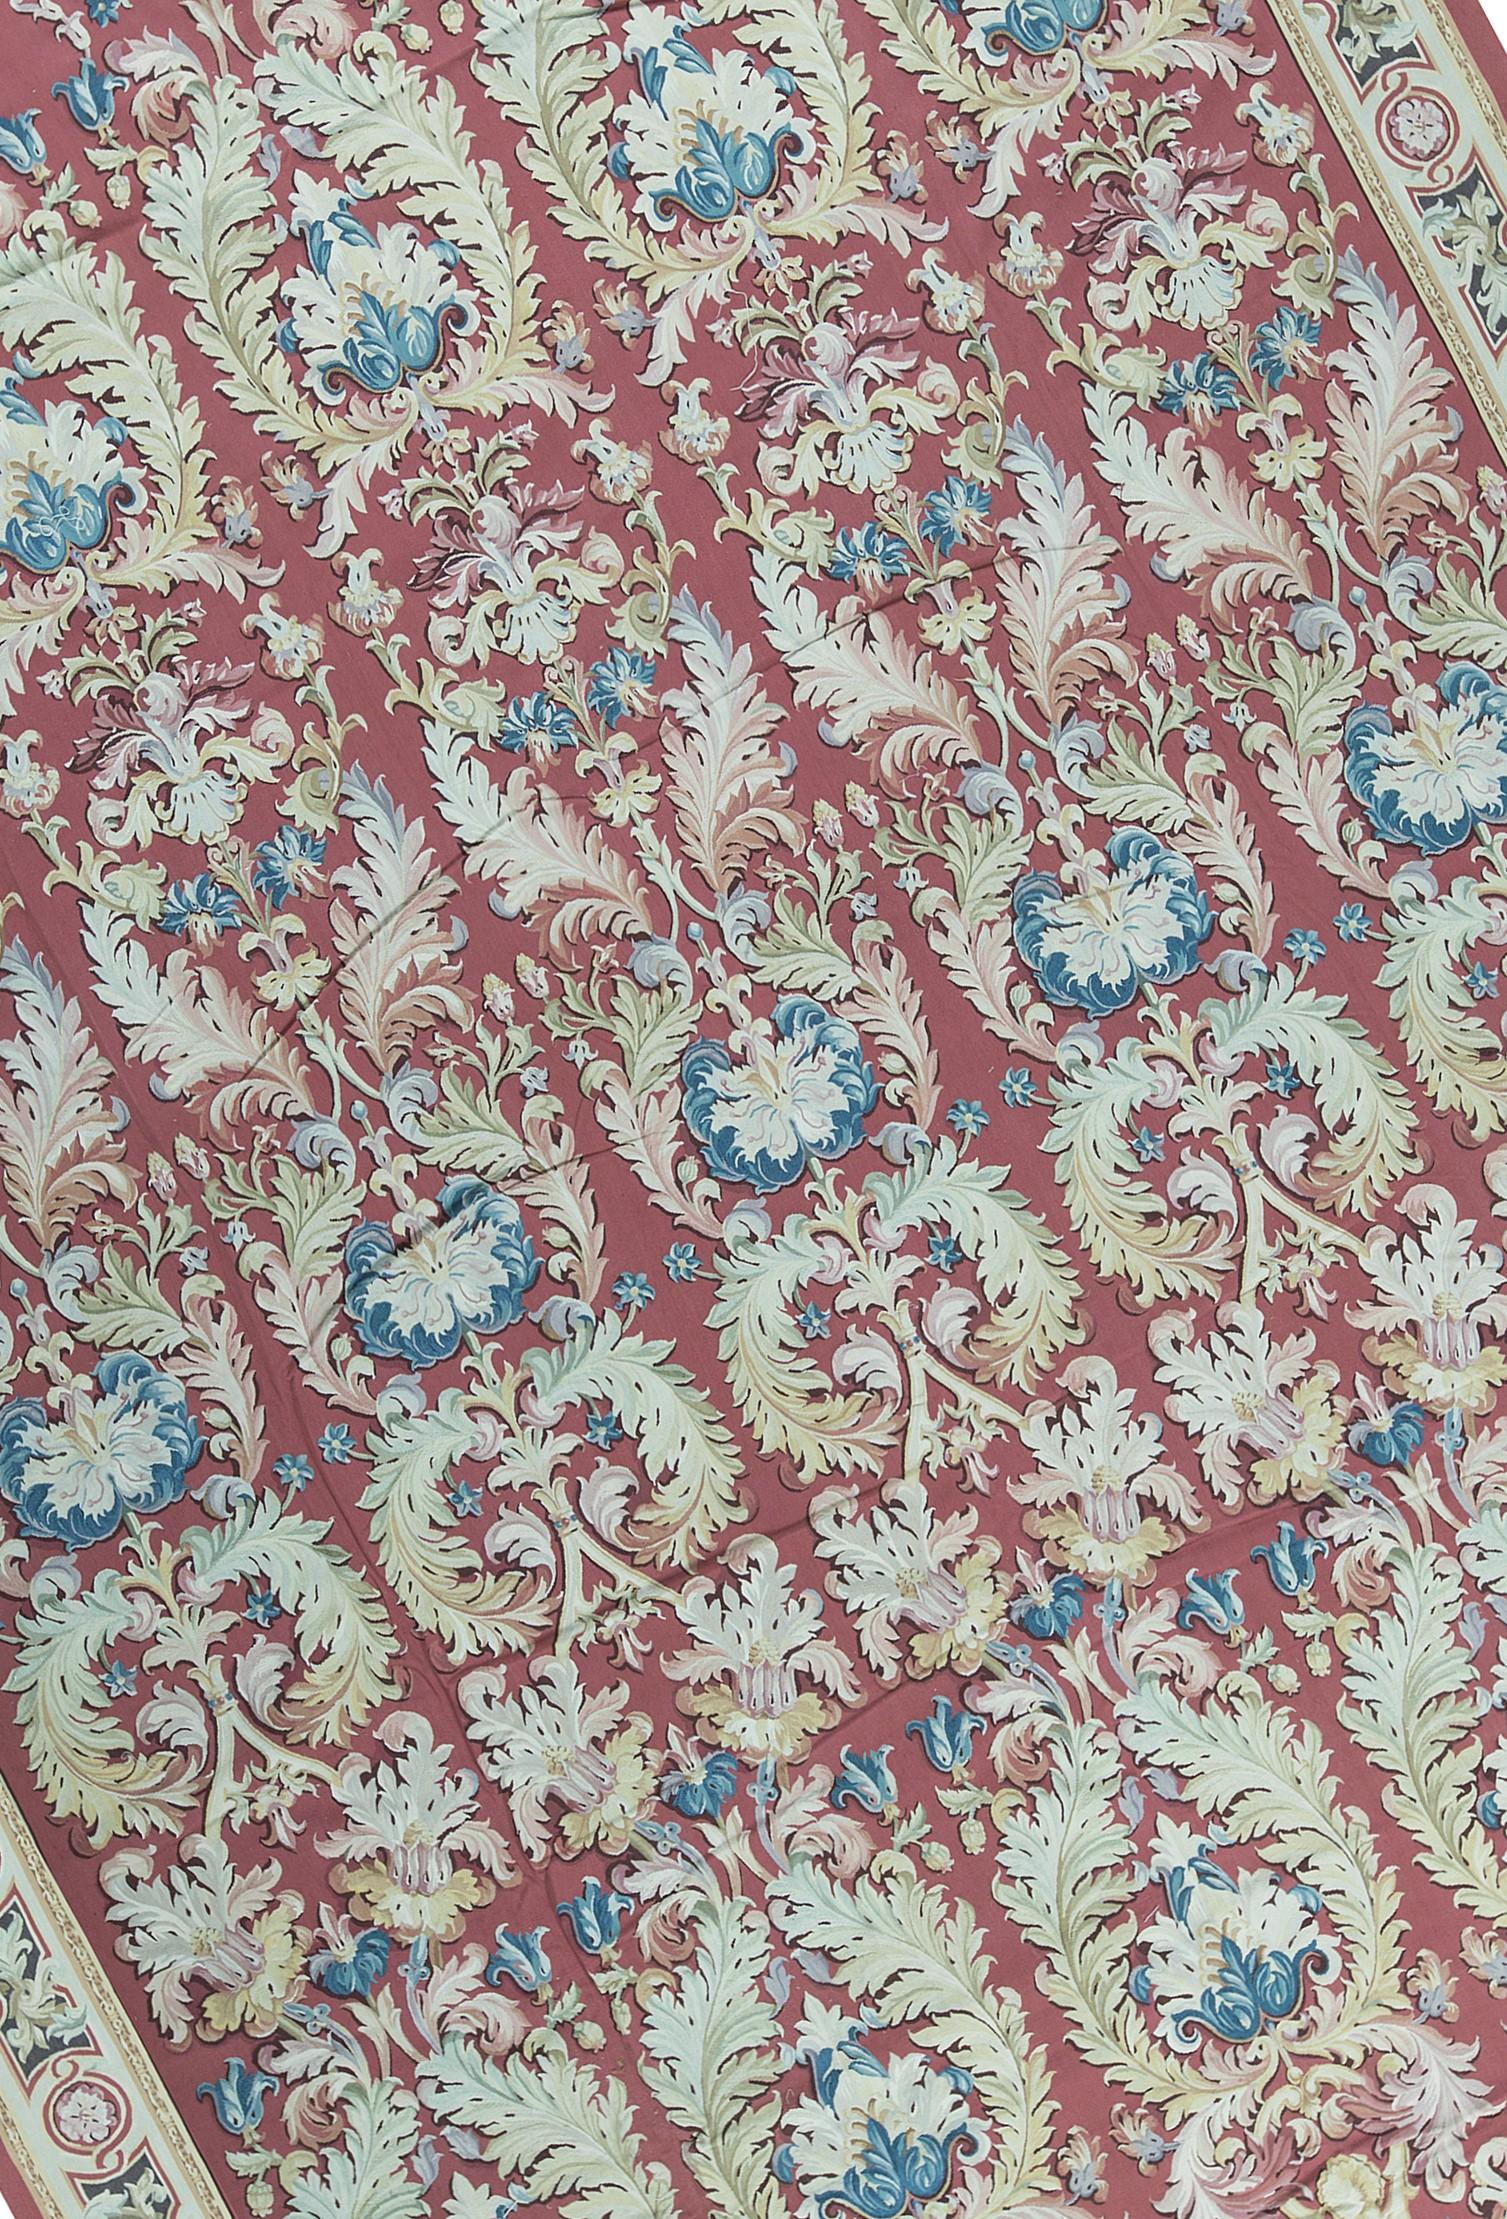 Handwoven Recreation of the Classic French flat-weave Aubusson rugs that have been found in the finest homes and palaces since the late 17th century. Size 13' 4” x 20' 1”.